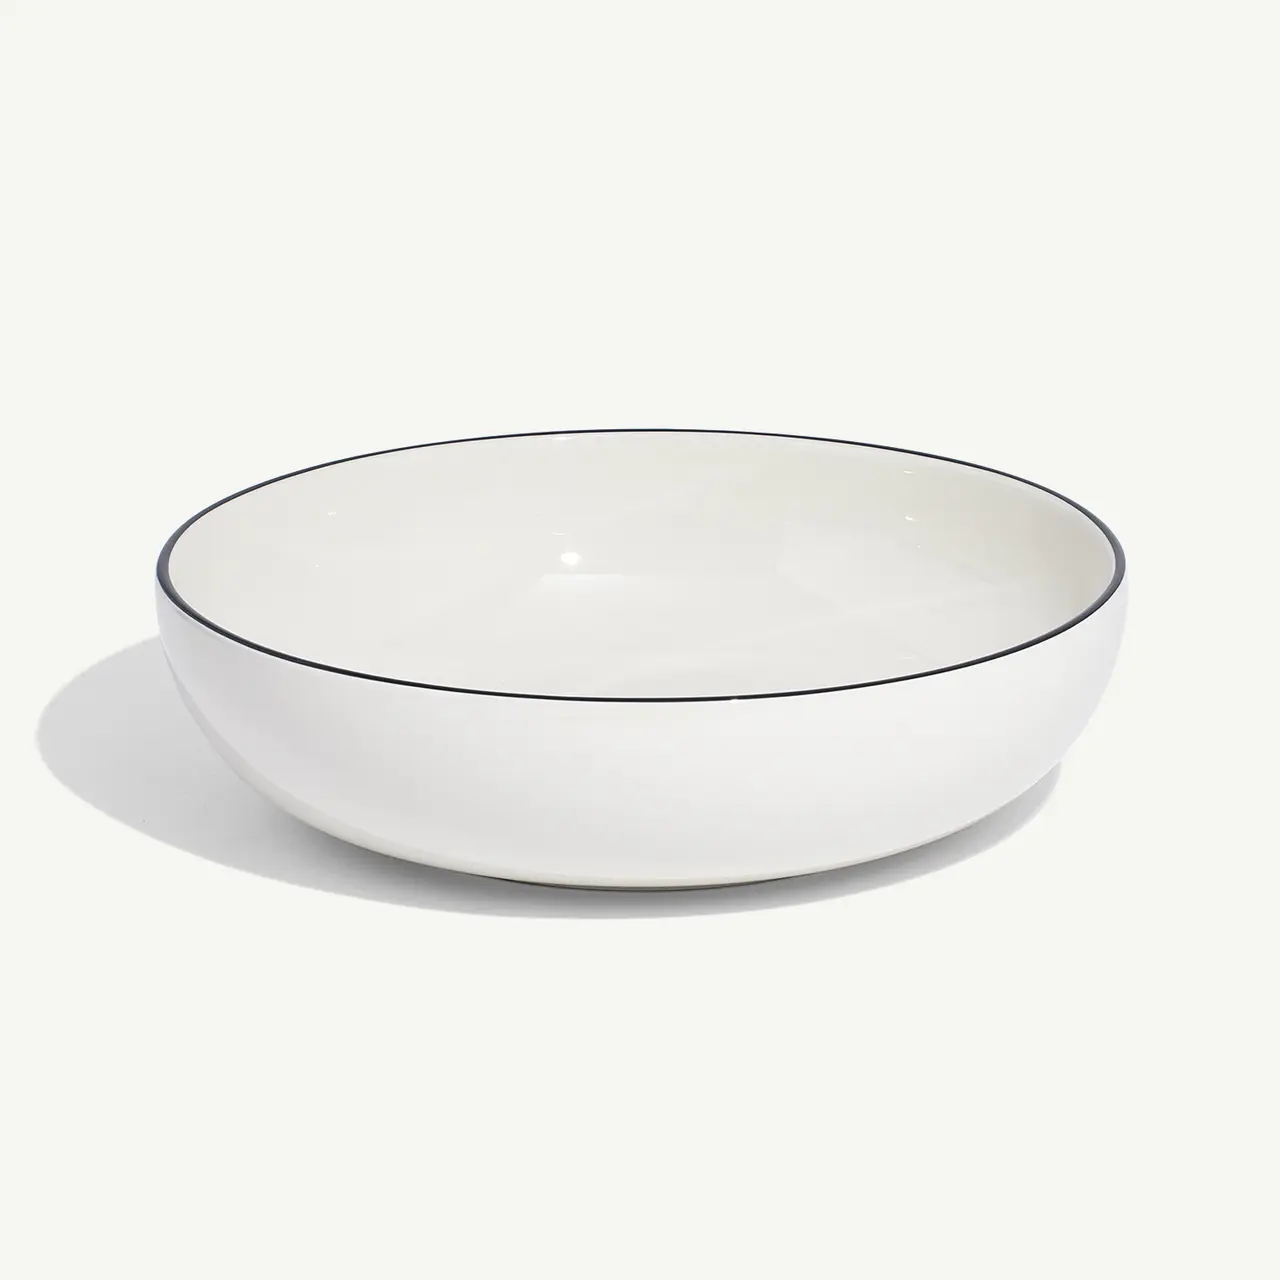 A simple white ceramic bowl with a subtle rim sits isolated on a plain background.